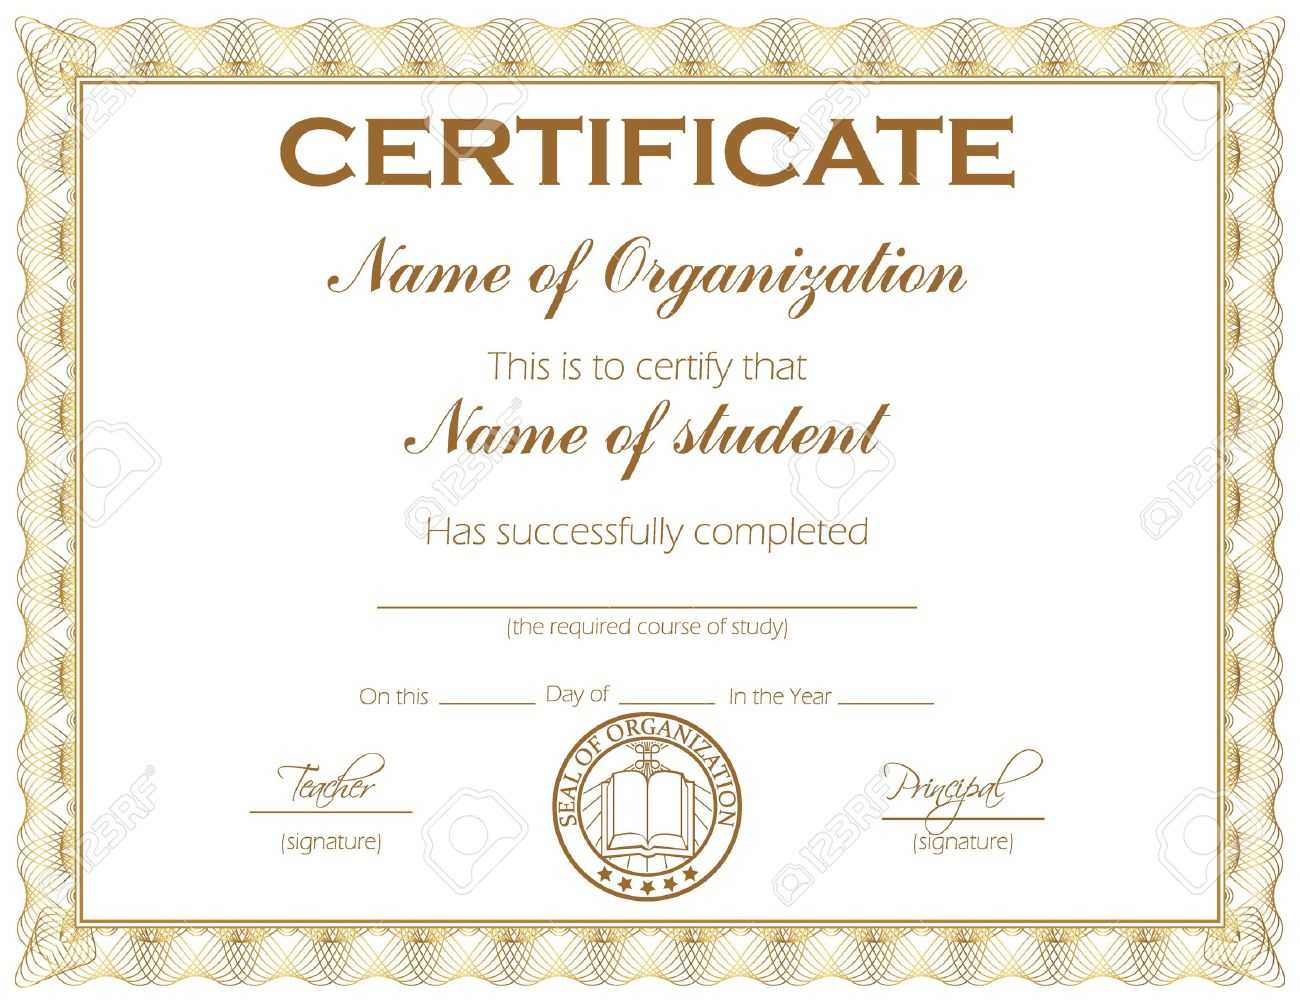 General Purpose Certificate Or Award With Sample Text That Can.. Intended For Sample Certificate Of Recognition Template